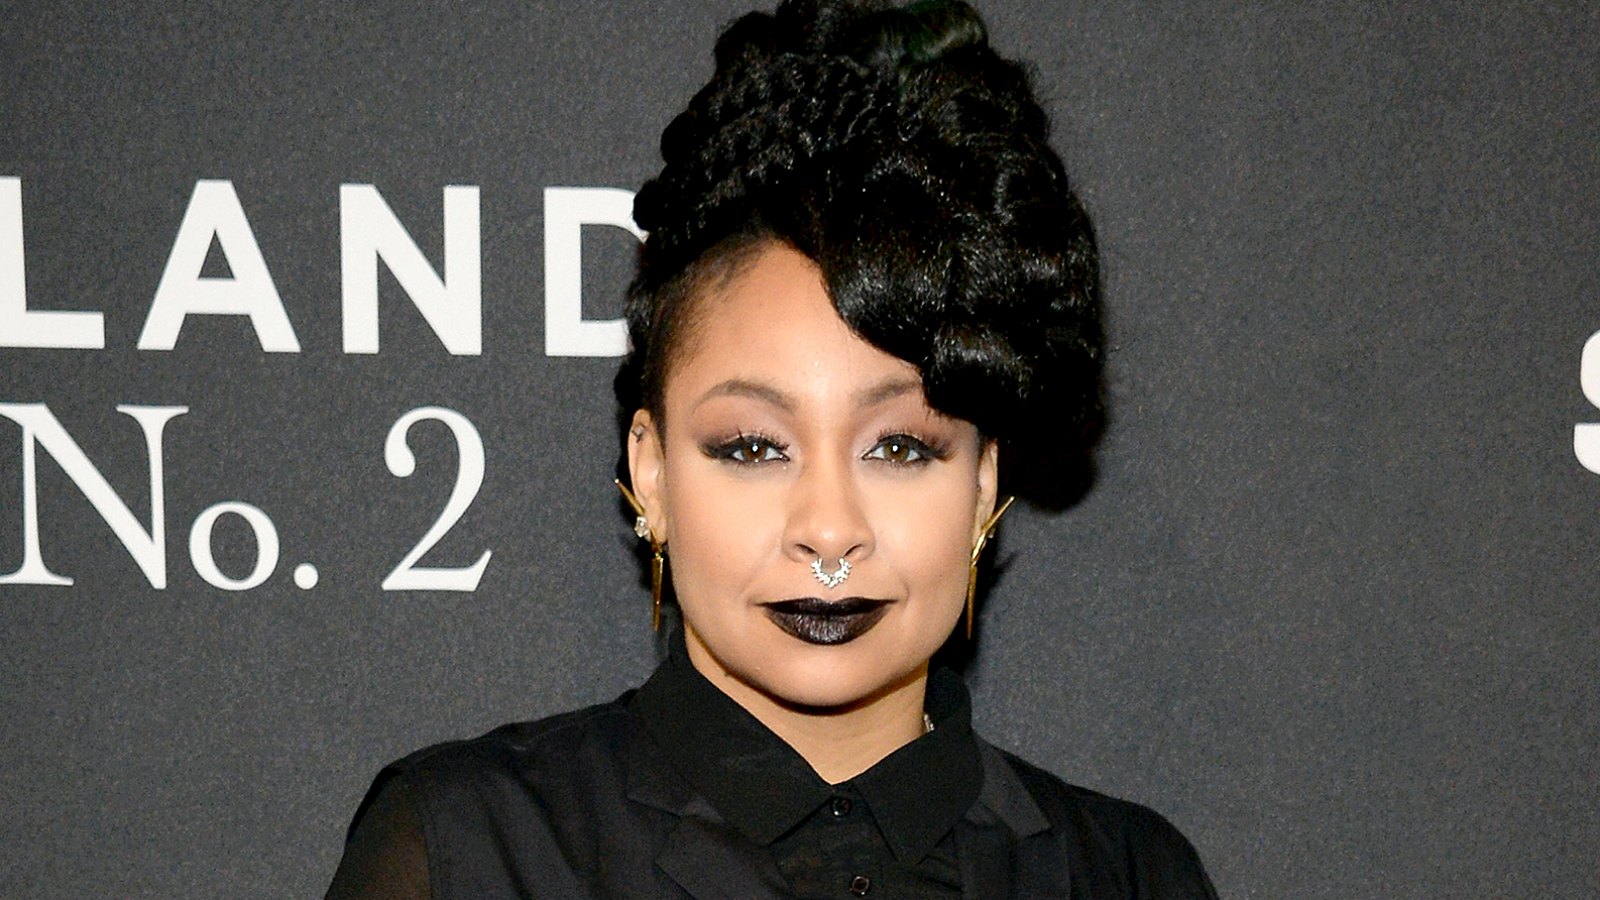 Raven-Symone attends the "Zoolander 2" World Premiere at Alice Tully Hall on February 9, 2016 in New York City.